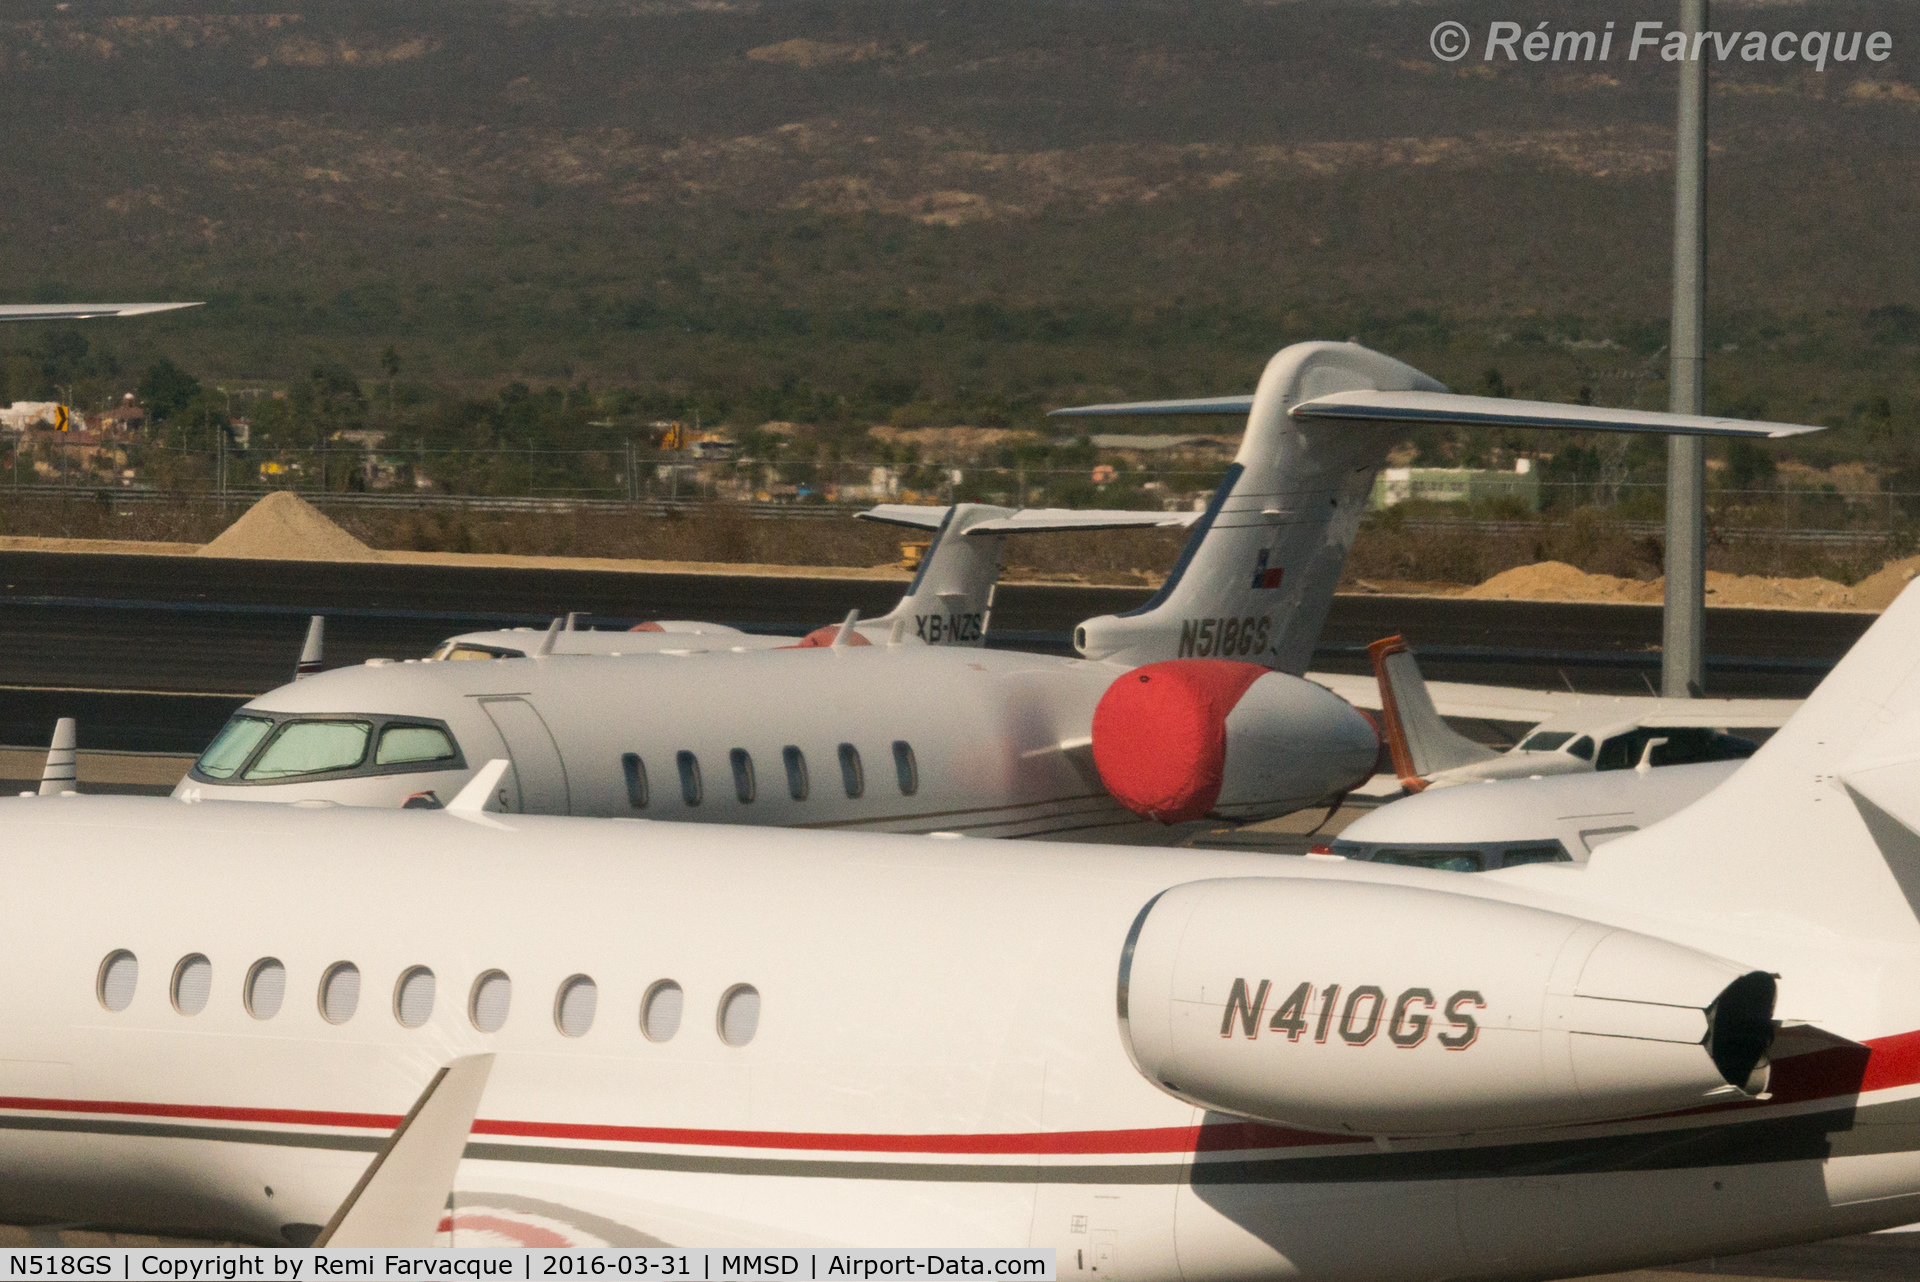 N518GS, 2006 Bombardier Challenger 300 (BD-100-1A10) C/N 20132, Parked north of main terminal building in private craft area. Photo shot from another aircraft.